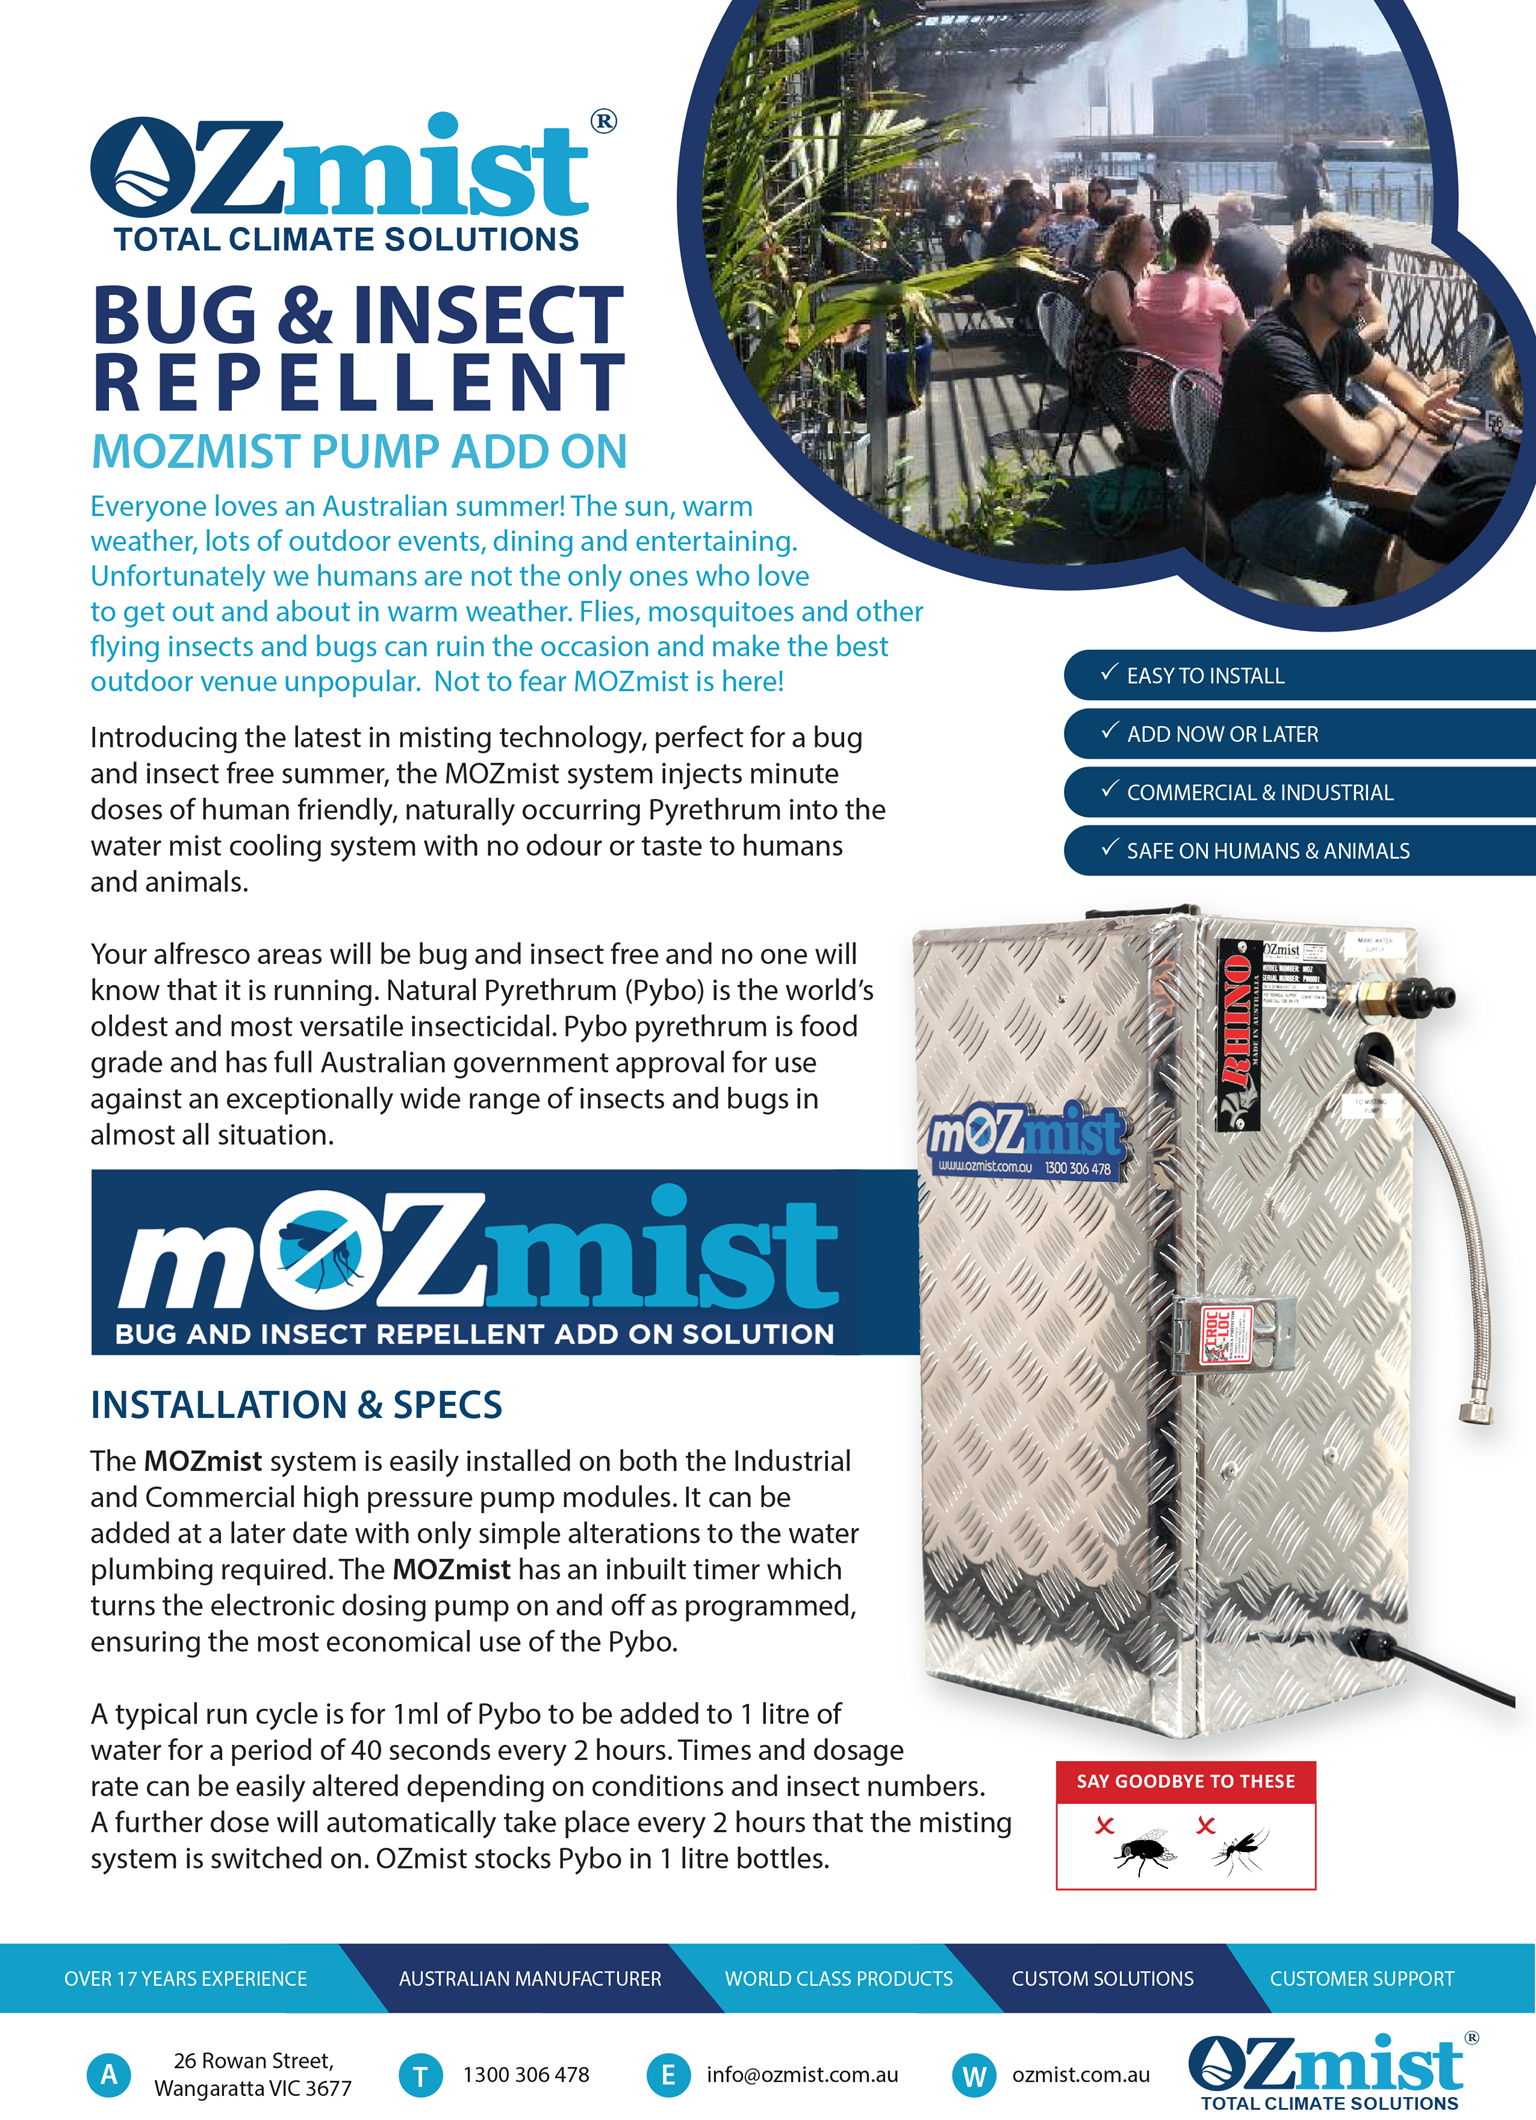 mOZmist Bug and Insect Repellent Add On Solution